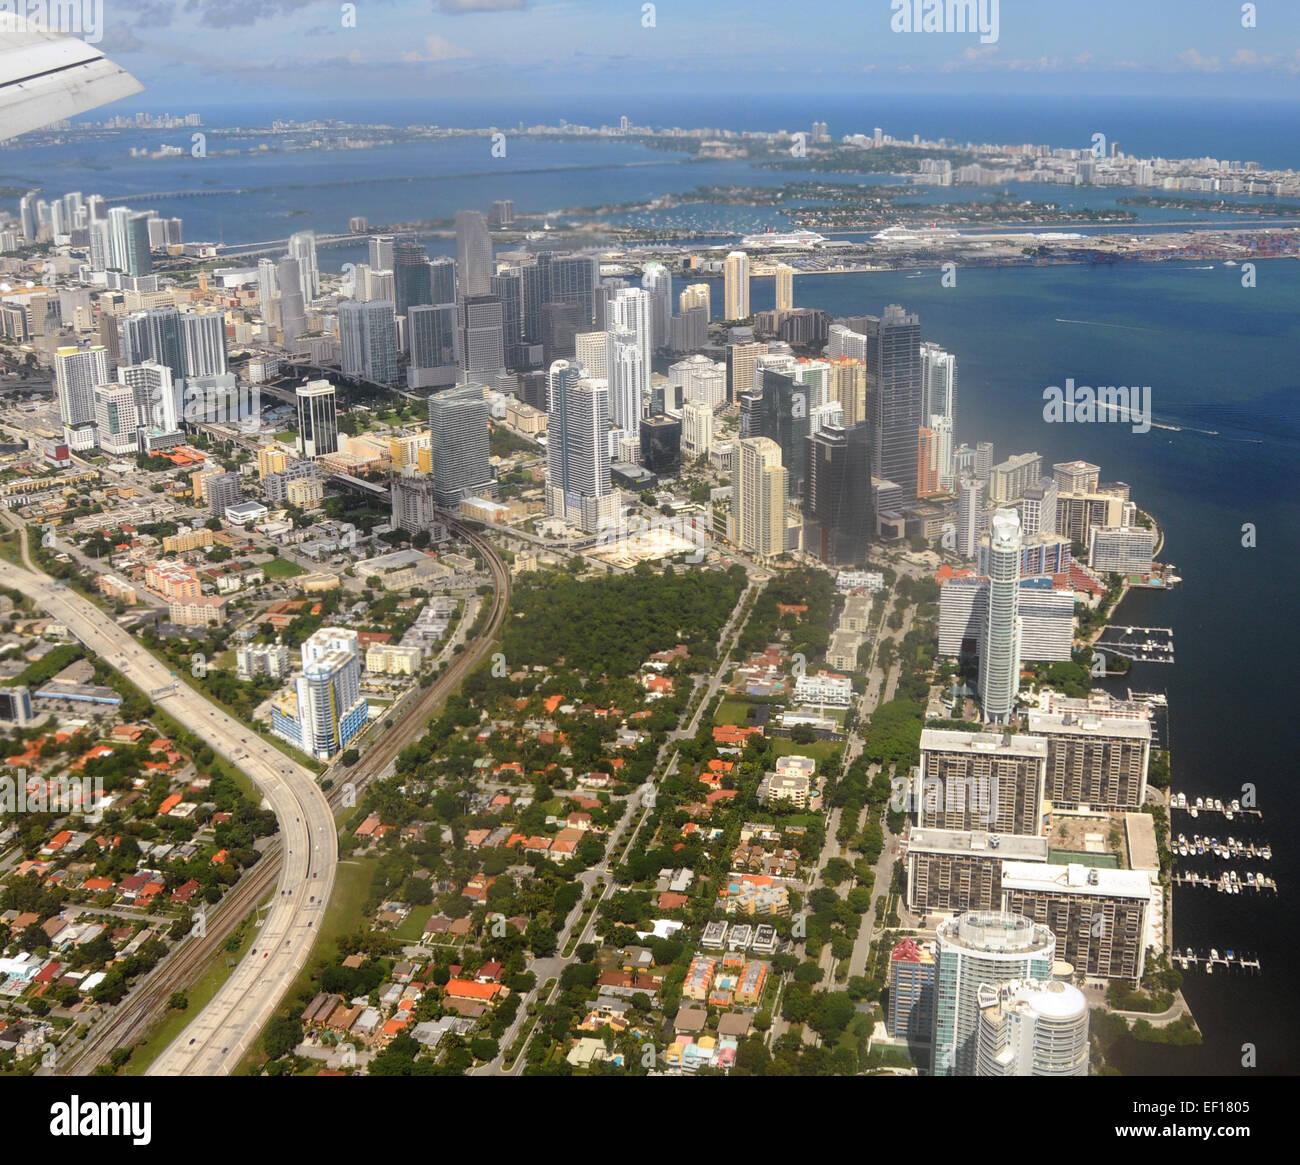 Downtown Miami, Florida, aerial view from airplane Stock Photo